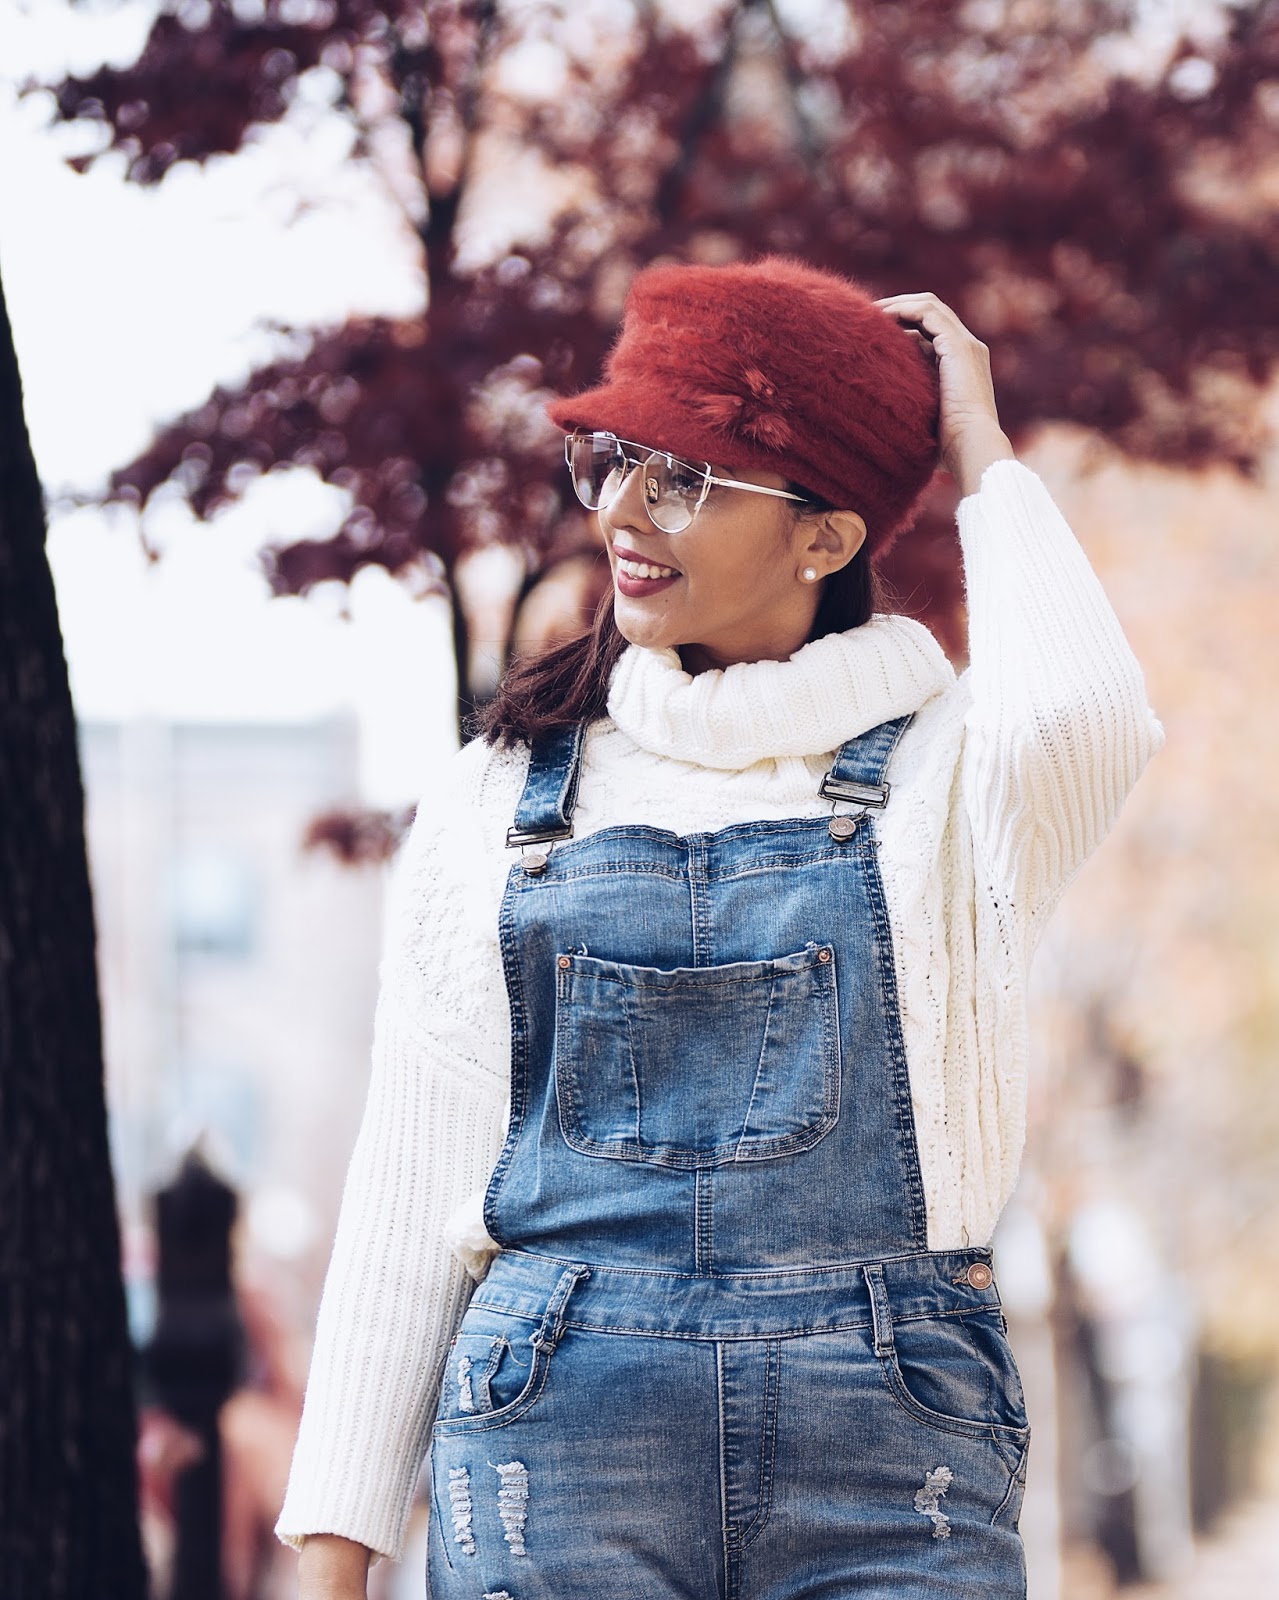 Wearing: Red Cap: TwinkleDeals Overall: SheIn Sweater: SheIn Shoes: Reebok Classic 